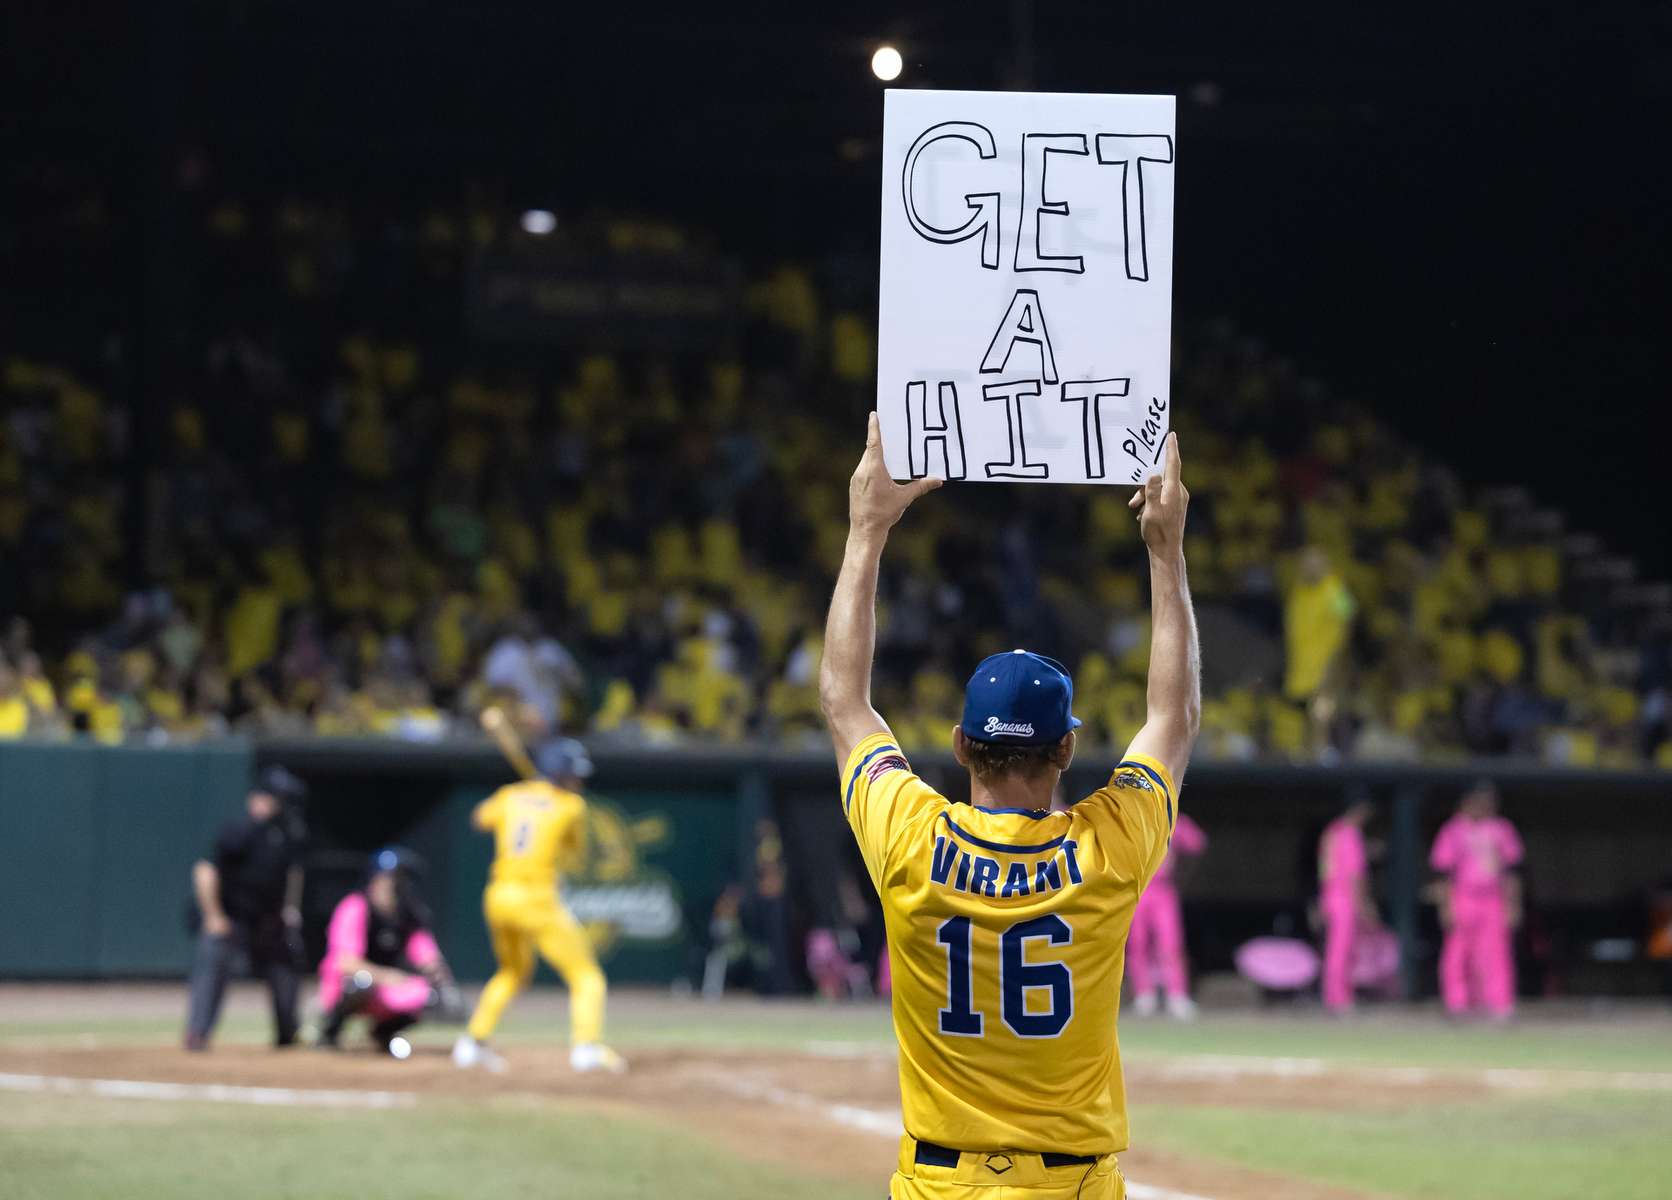 The first base coach of the Savannah Bananas holds a sign during the home opener against the Party Animals at Grayson Stadium on February 25, 2023 in Savannah, Georgia.